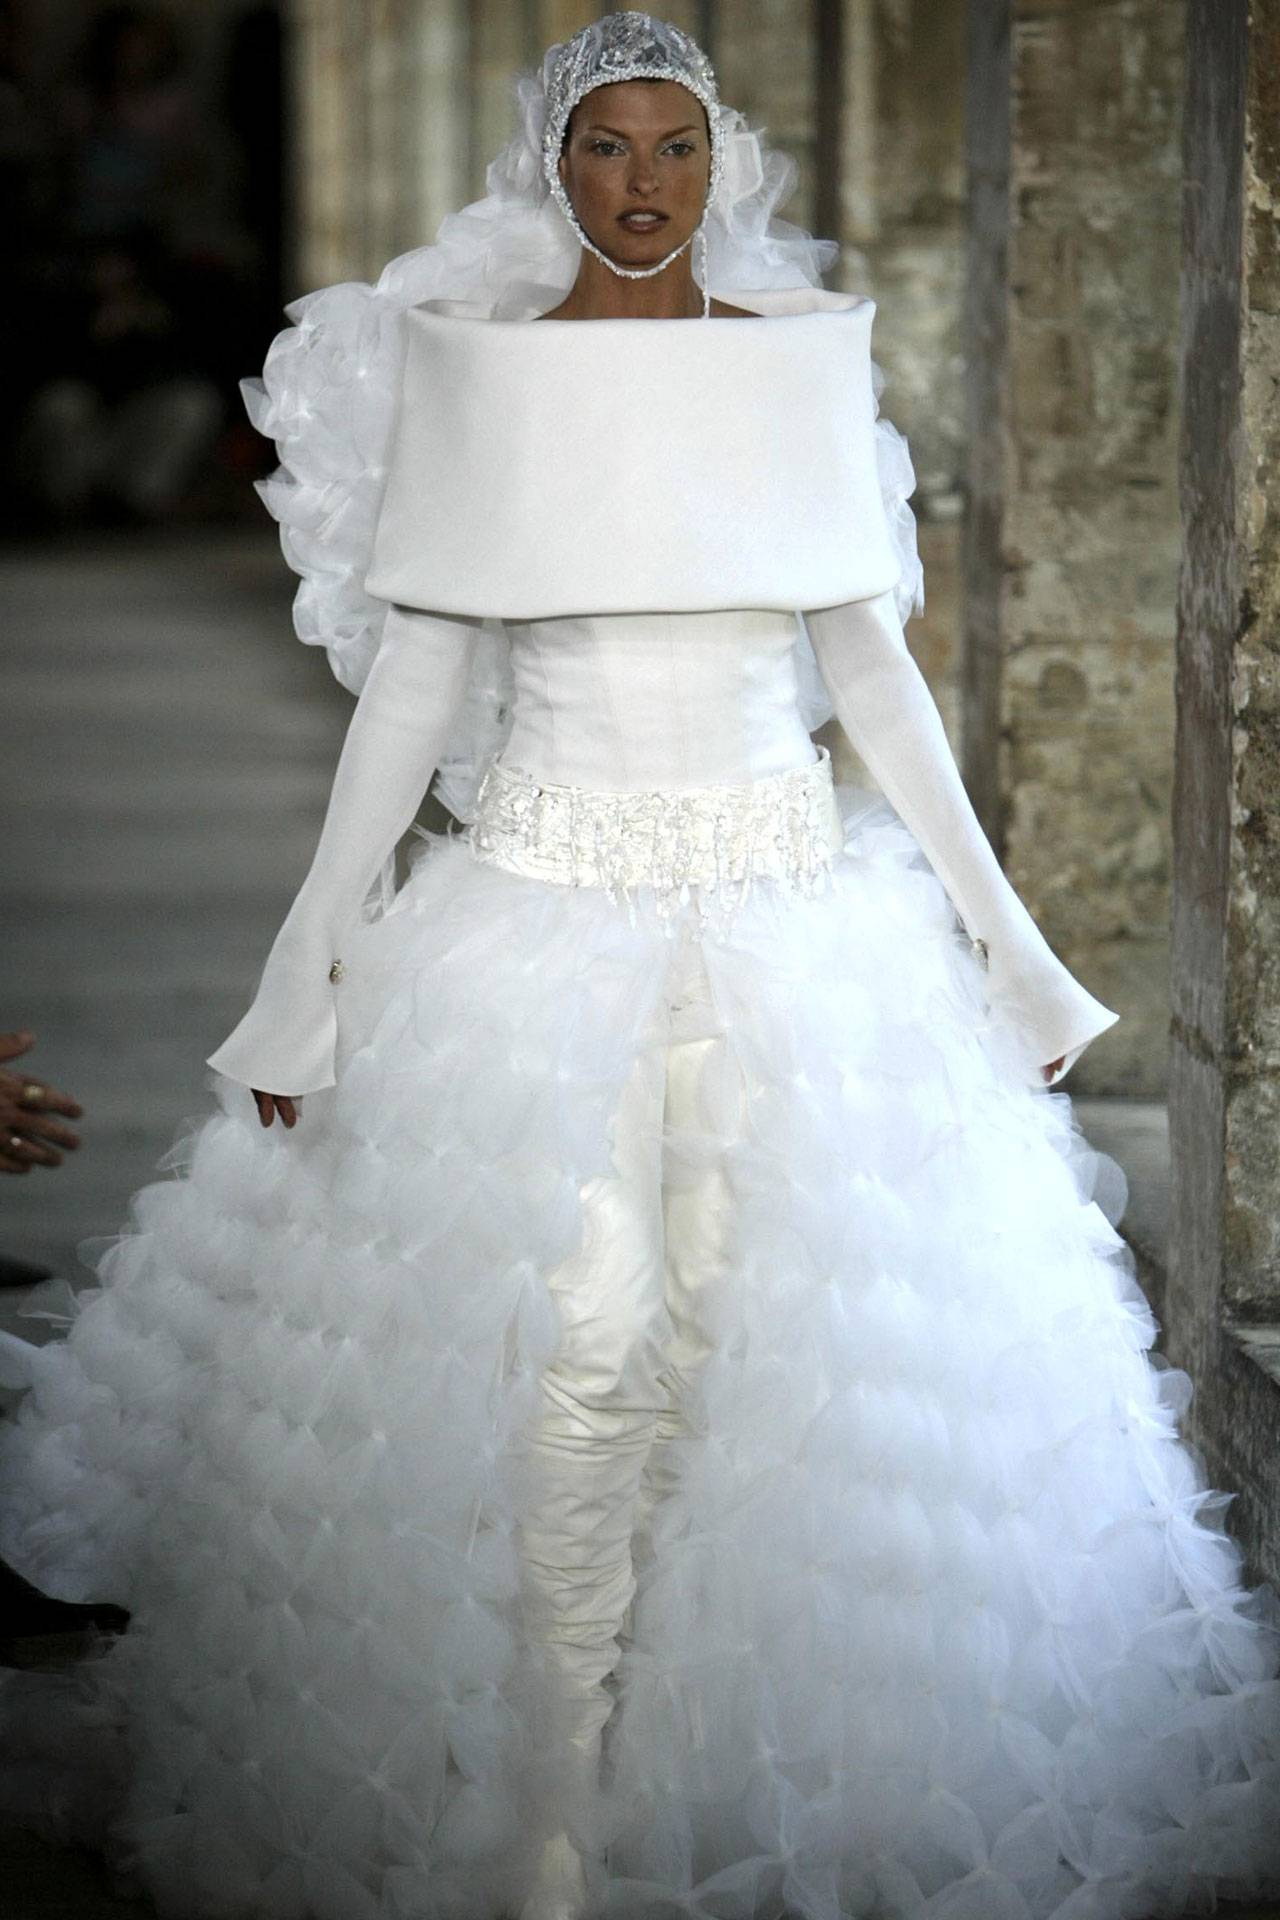 Chanel haute couture, 2003, Fot. Mark Large/Daily Mail/Shutterstock